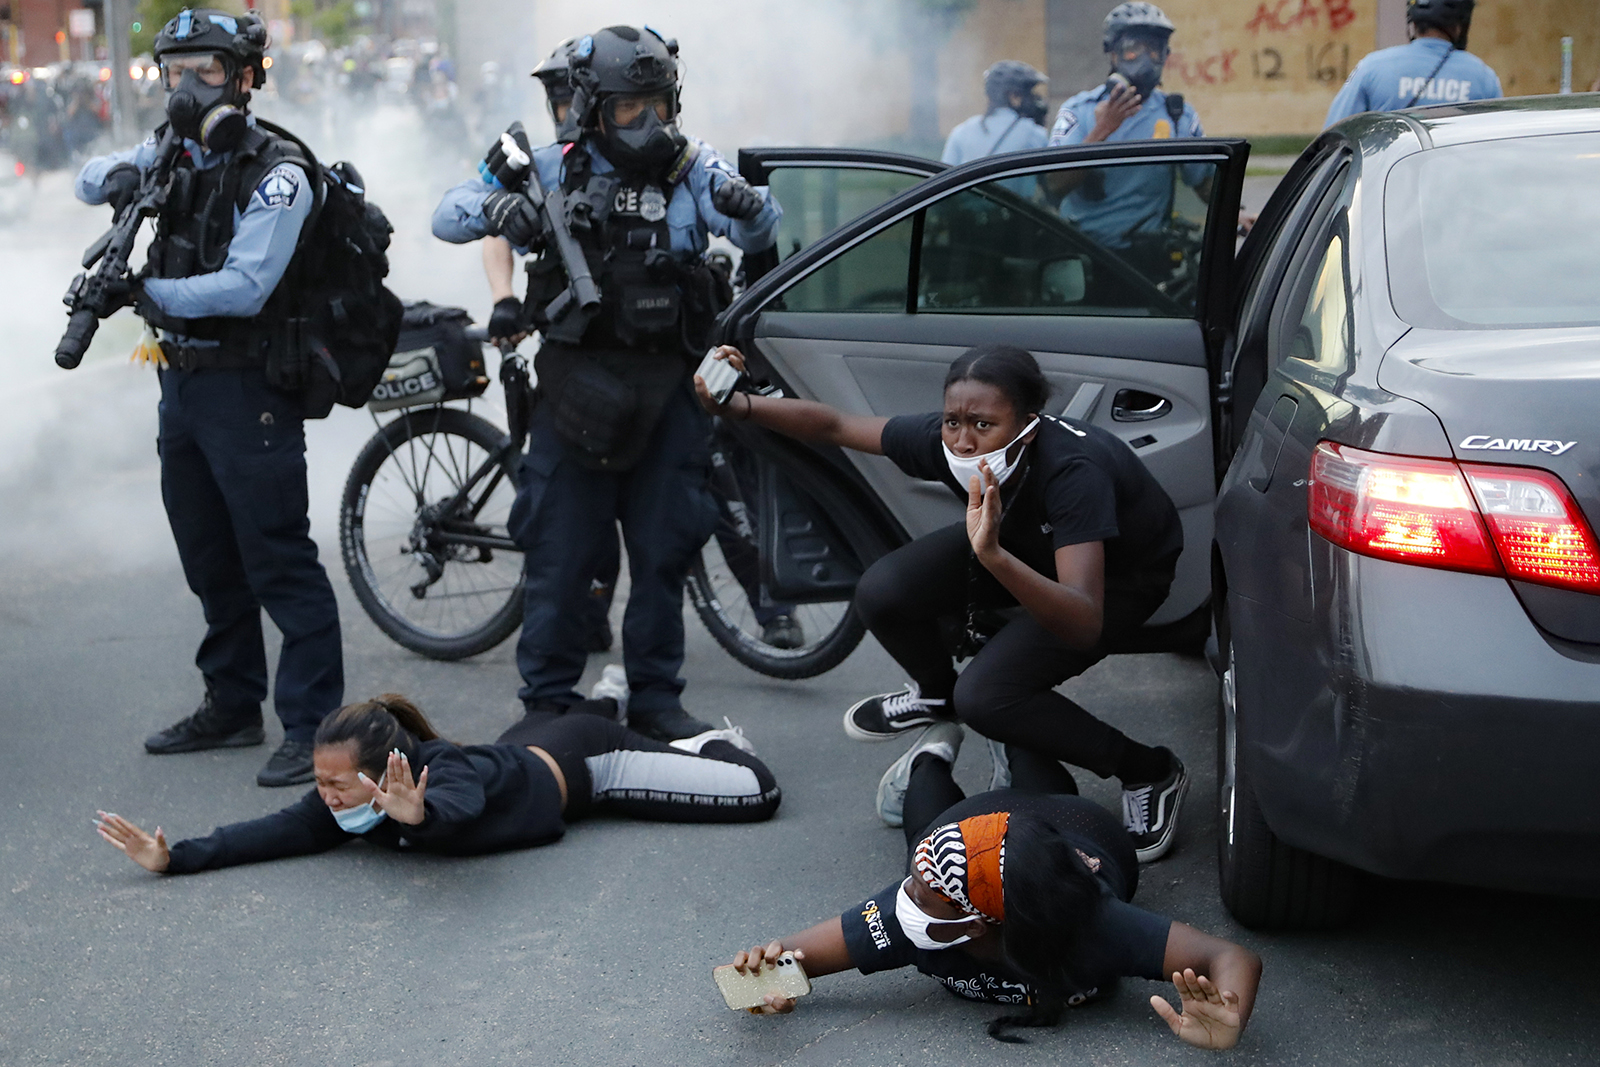 Motorists are ordered to the ground from their vehicle by police during a protest on South Washington Street, Sunday, May 31, 2020, in Minneapolis. Protests continued following the death of George Floyd, who died after being restrained by Minneapolis police officers on Memorial Day. (AP Photo/John Minchillo)